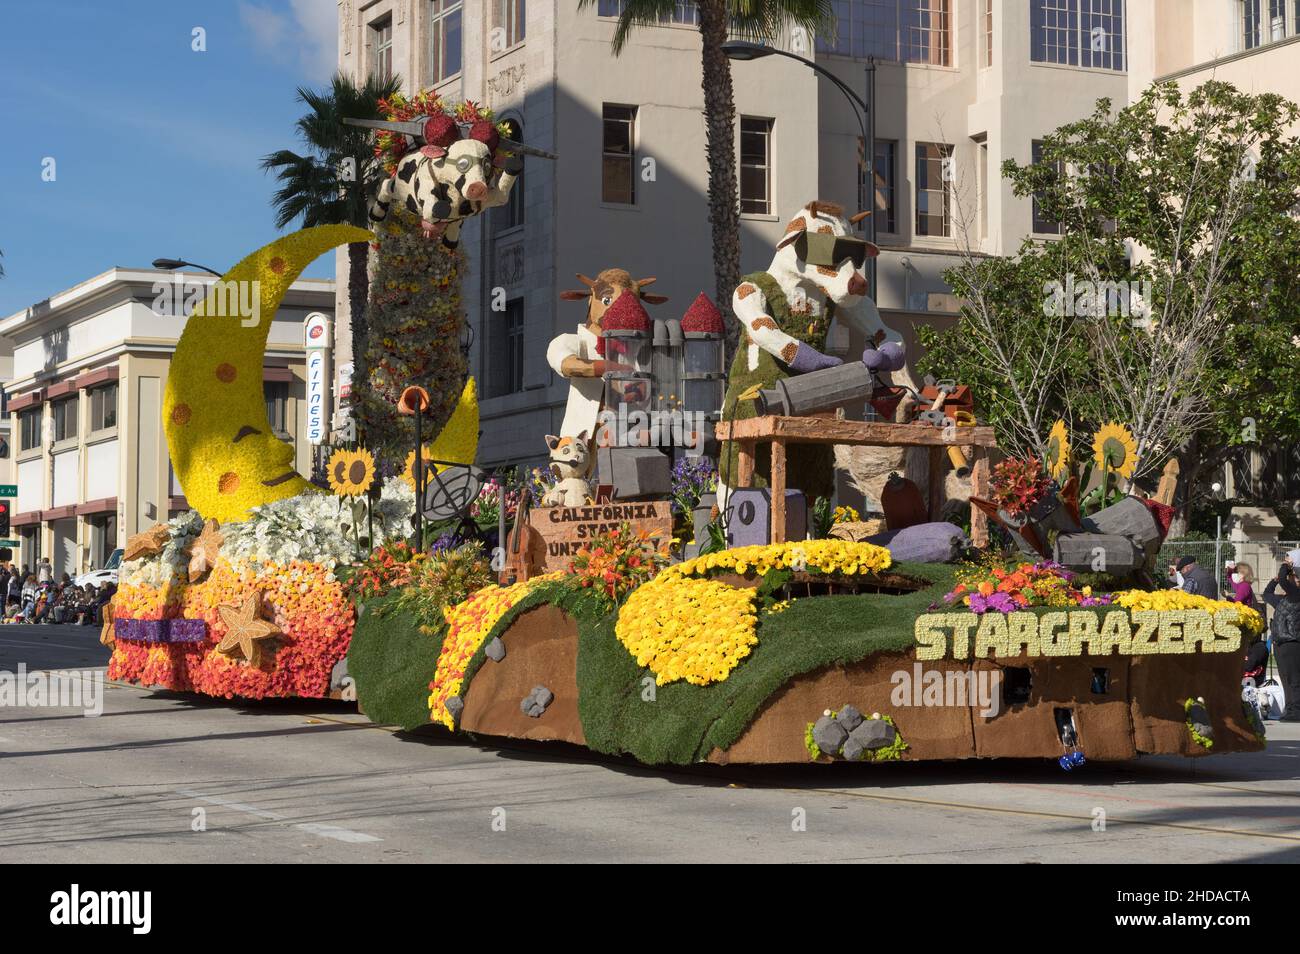 The California State University Stargazers float shown during the 2022 Rose Parade in Pasadena. Stock Photo